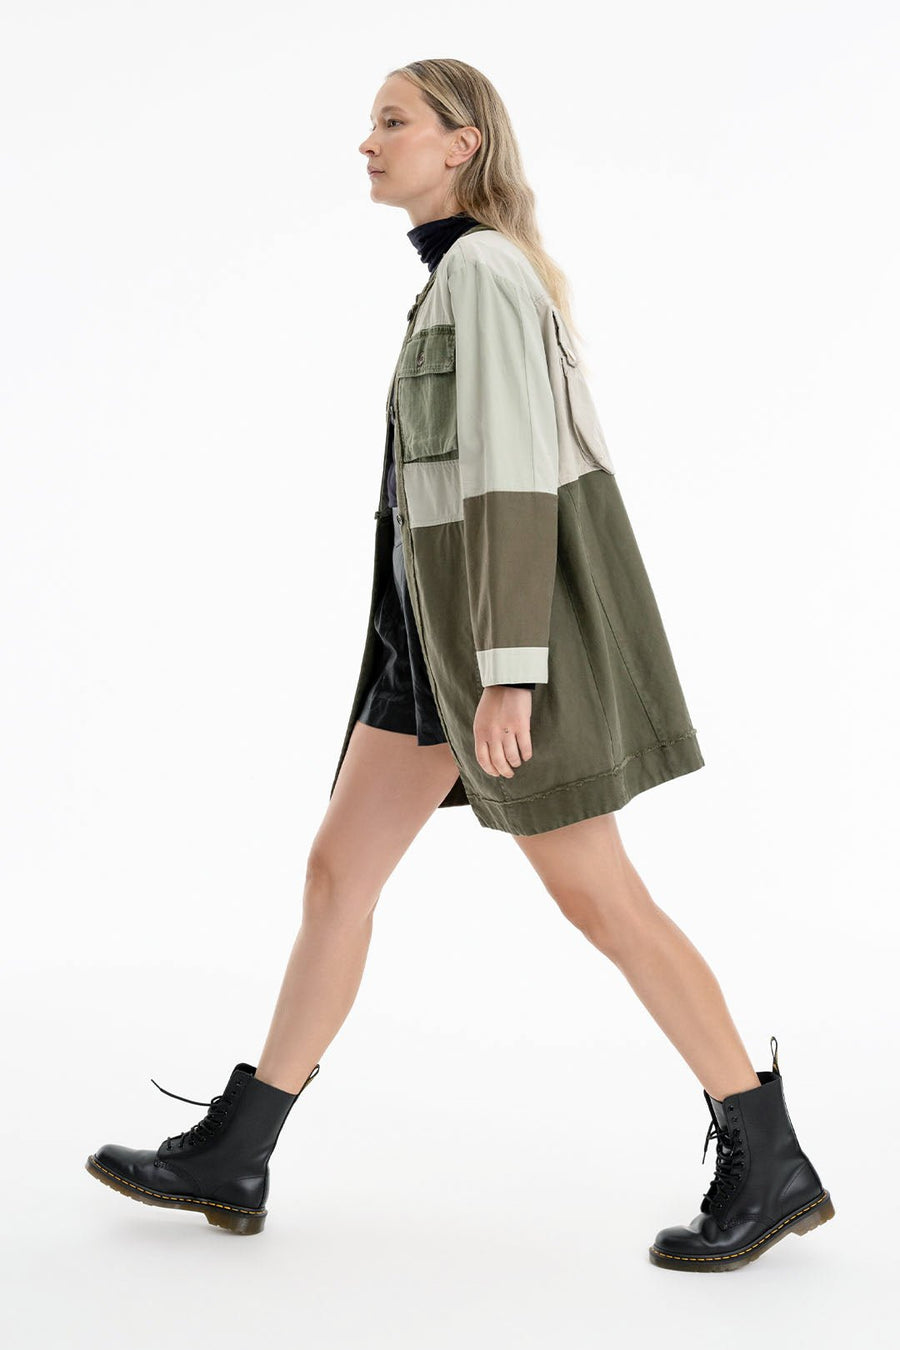 LOVE NOT WAR LONG JACKET, ARMY - Burning Torch Online Boutique